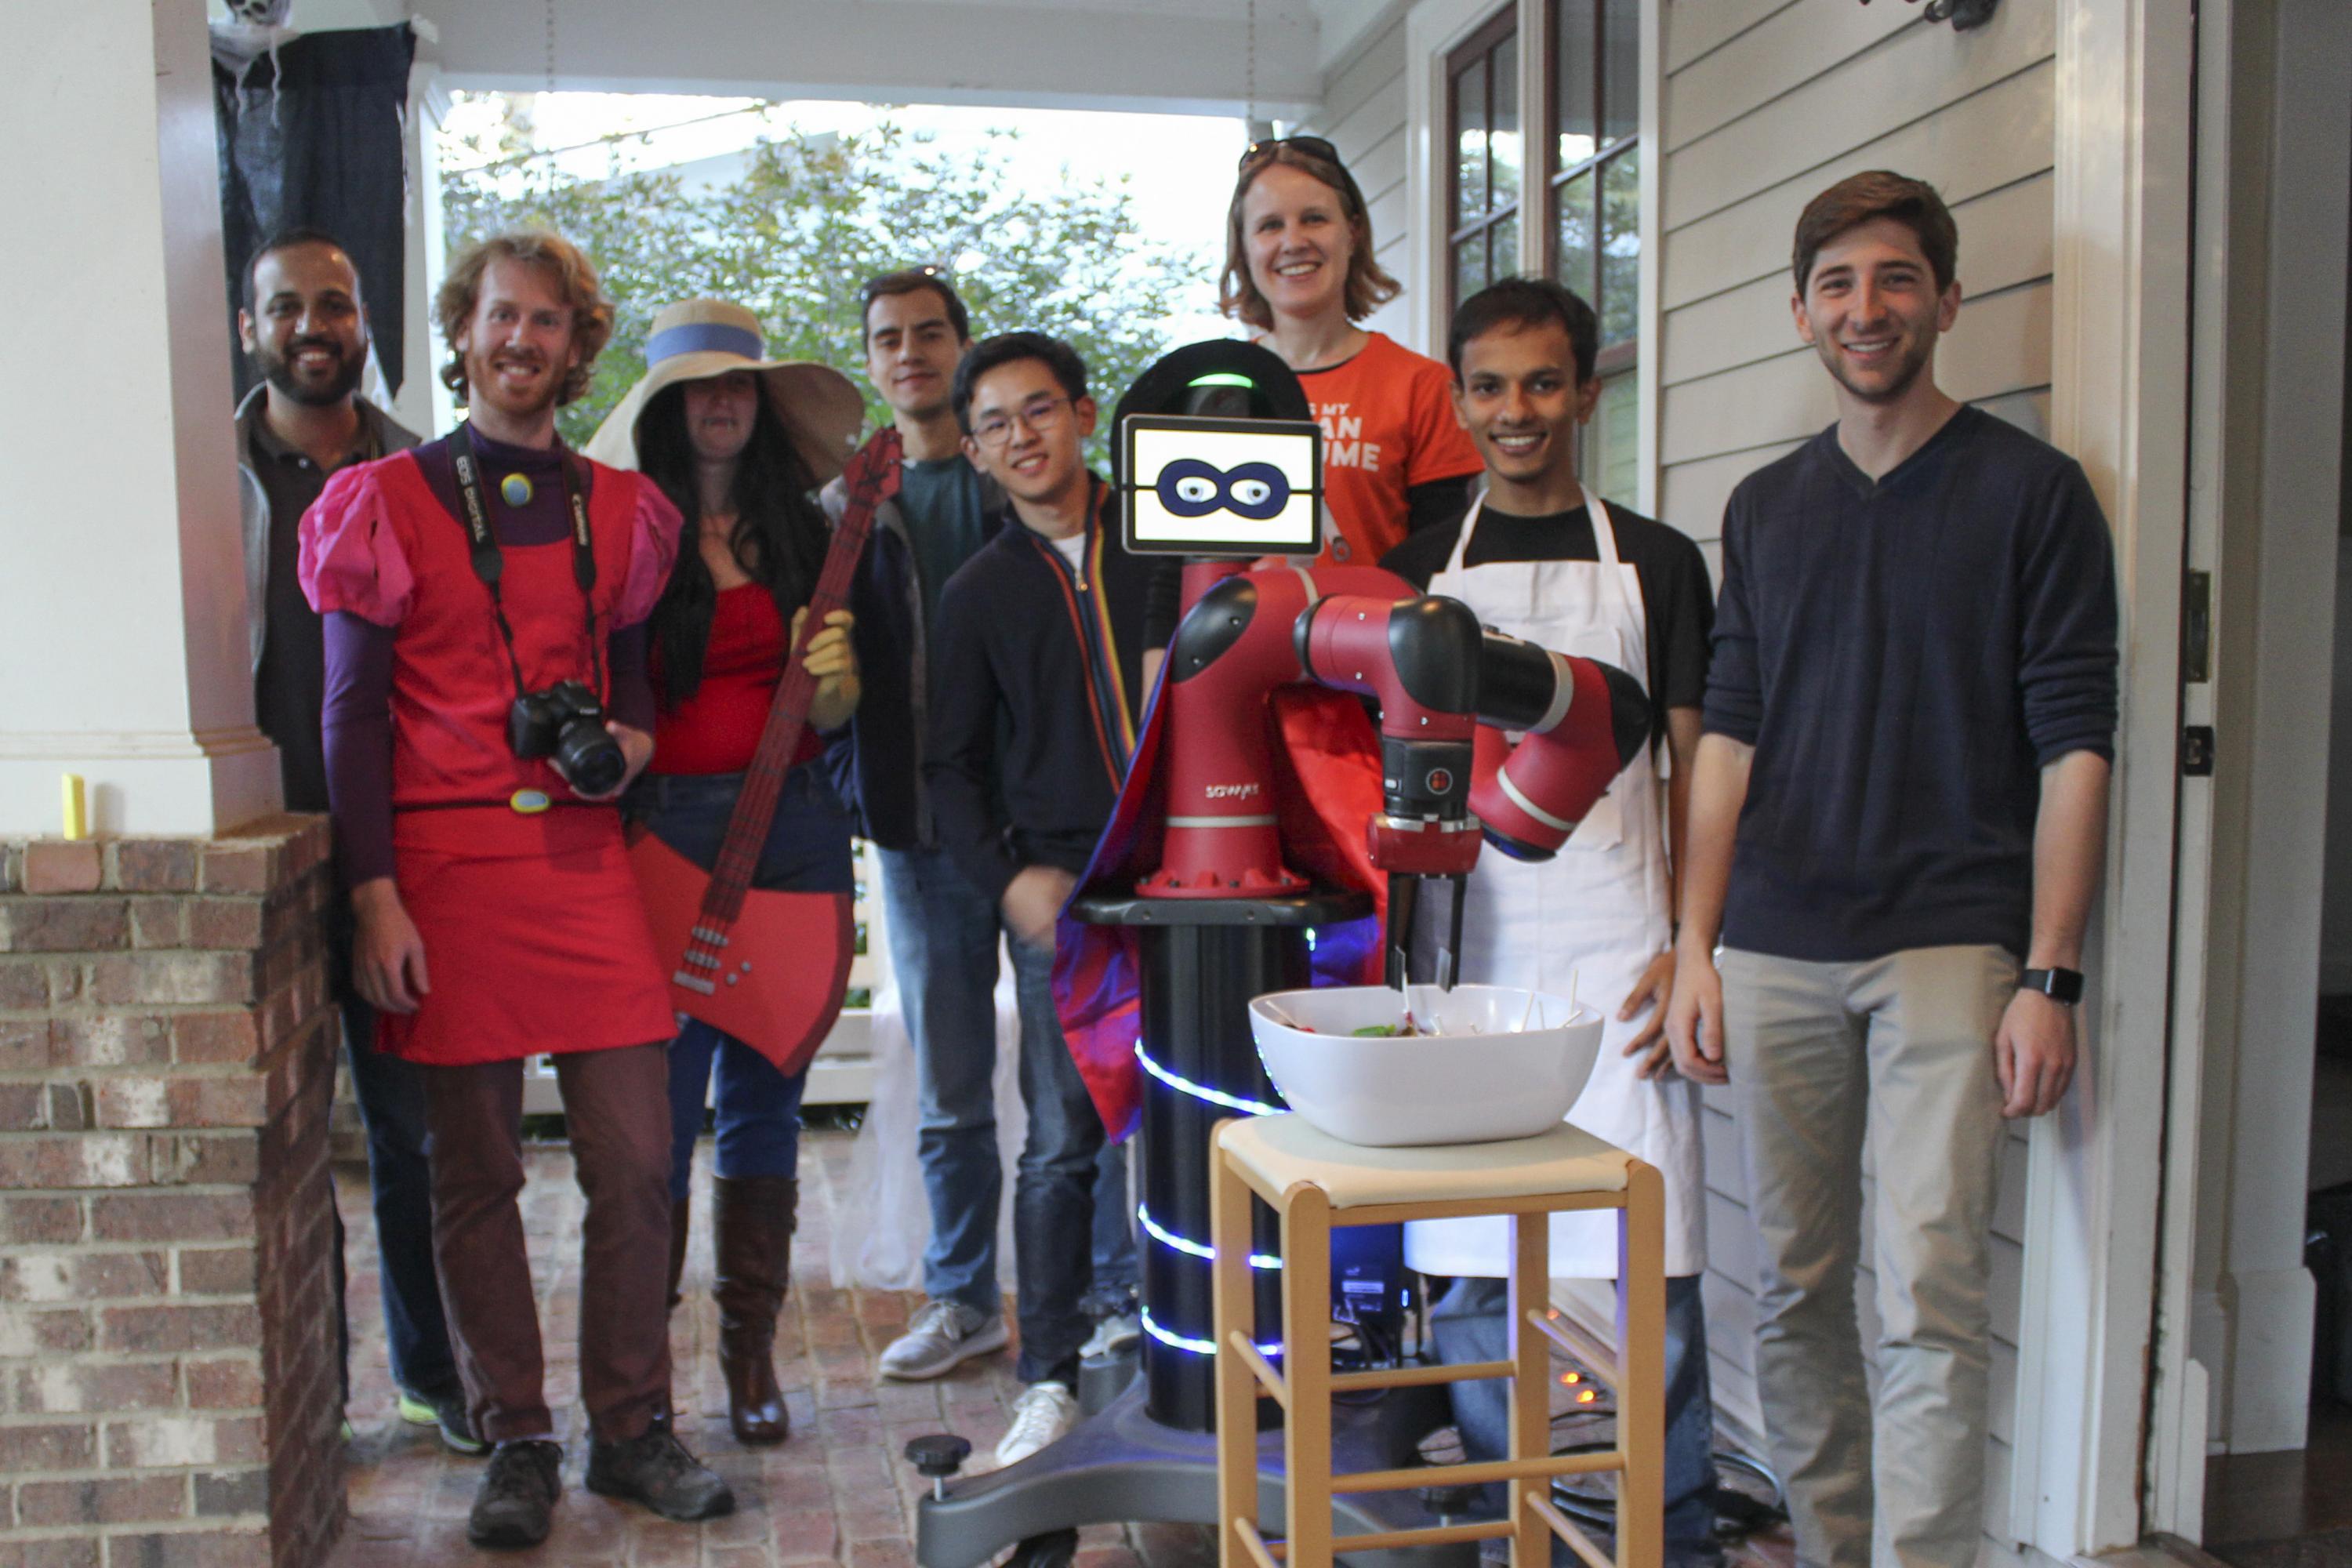 Members of the Robot Autonomy and Interactive Learning (RAIL) research lab, which focuses on the development of robotic systems that operate effectively in complex human environments, adapt to user preferences and learn from user input.